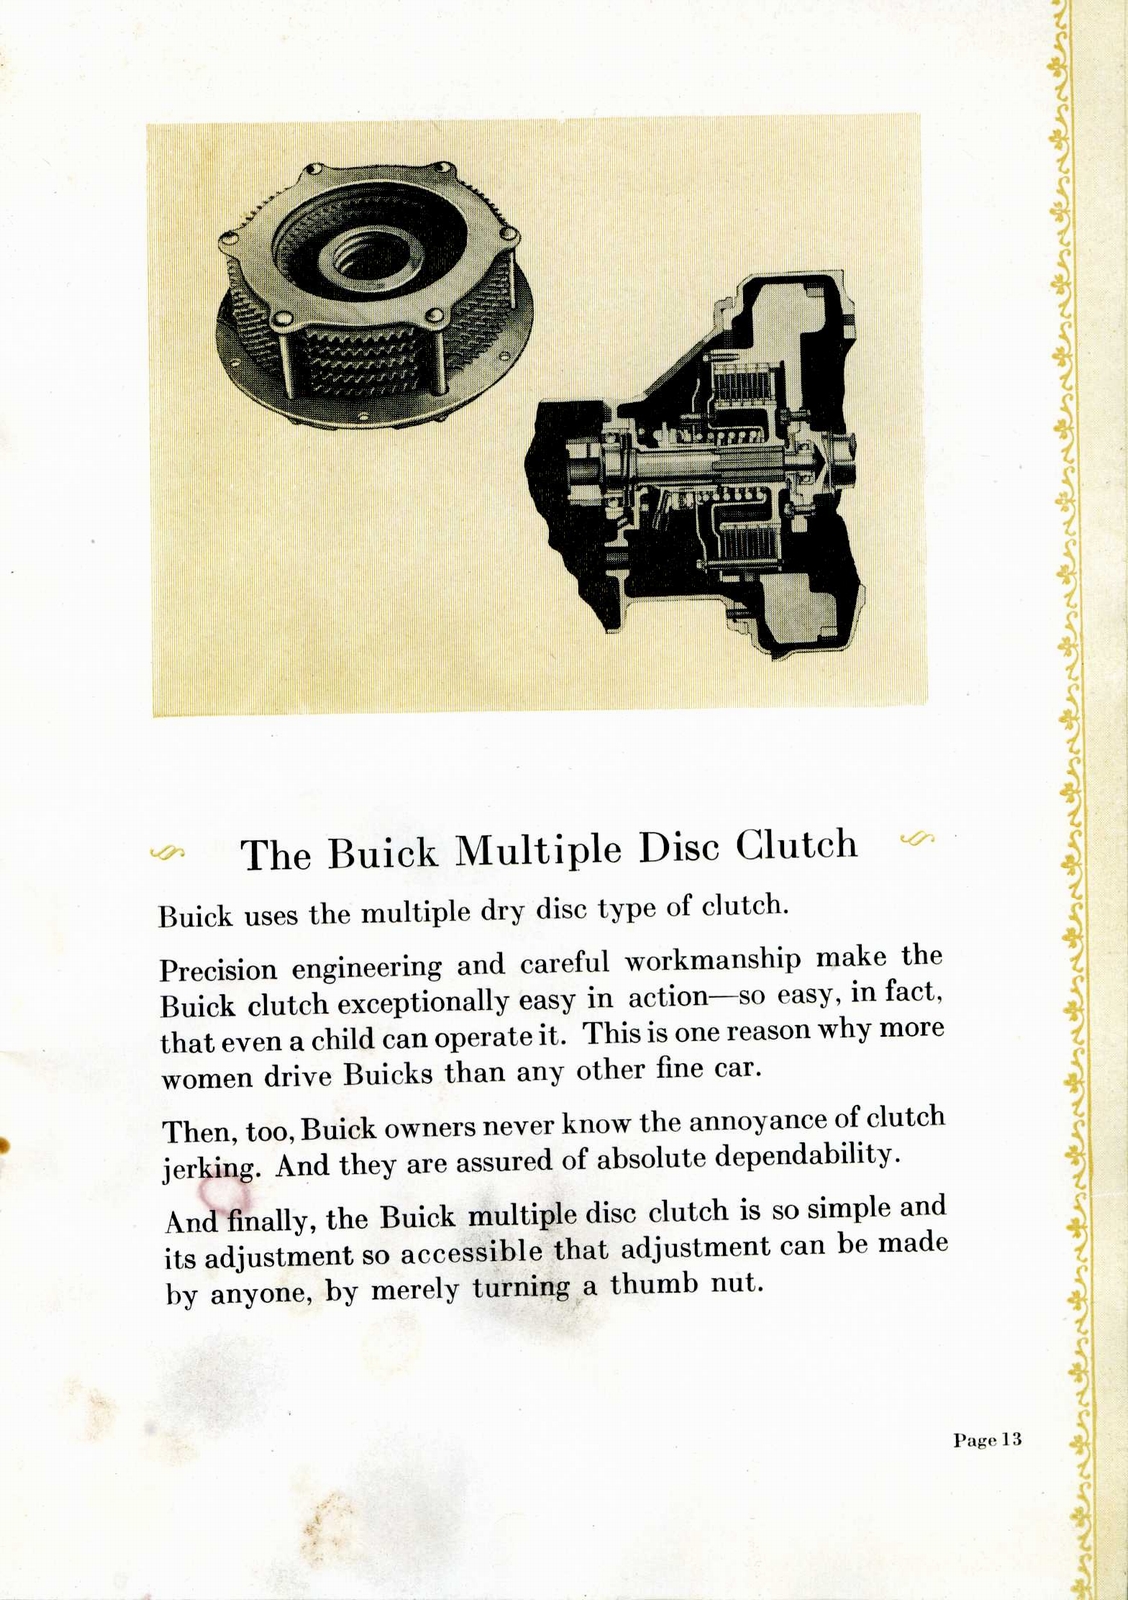 n_1928 Buick-How to Choose a Motor Car Wisely-13.jpg